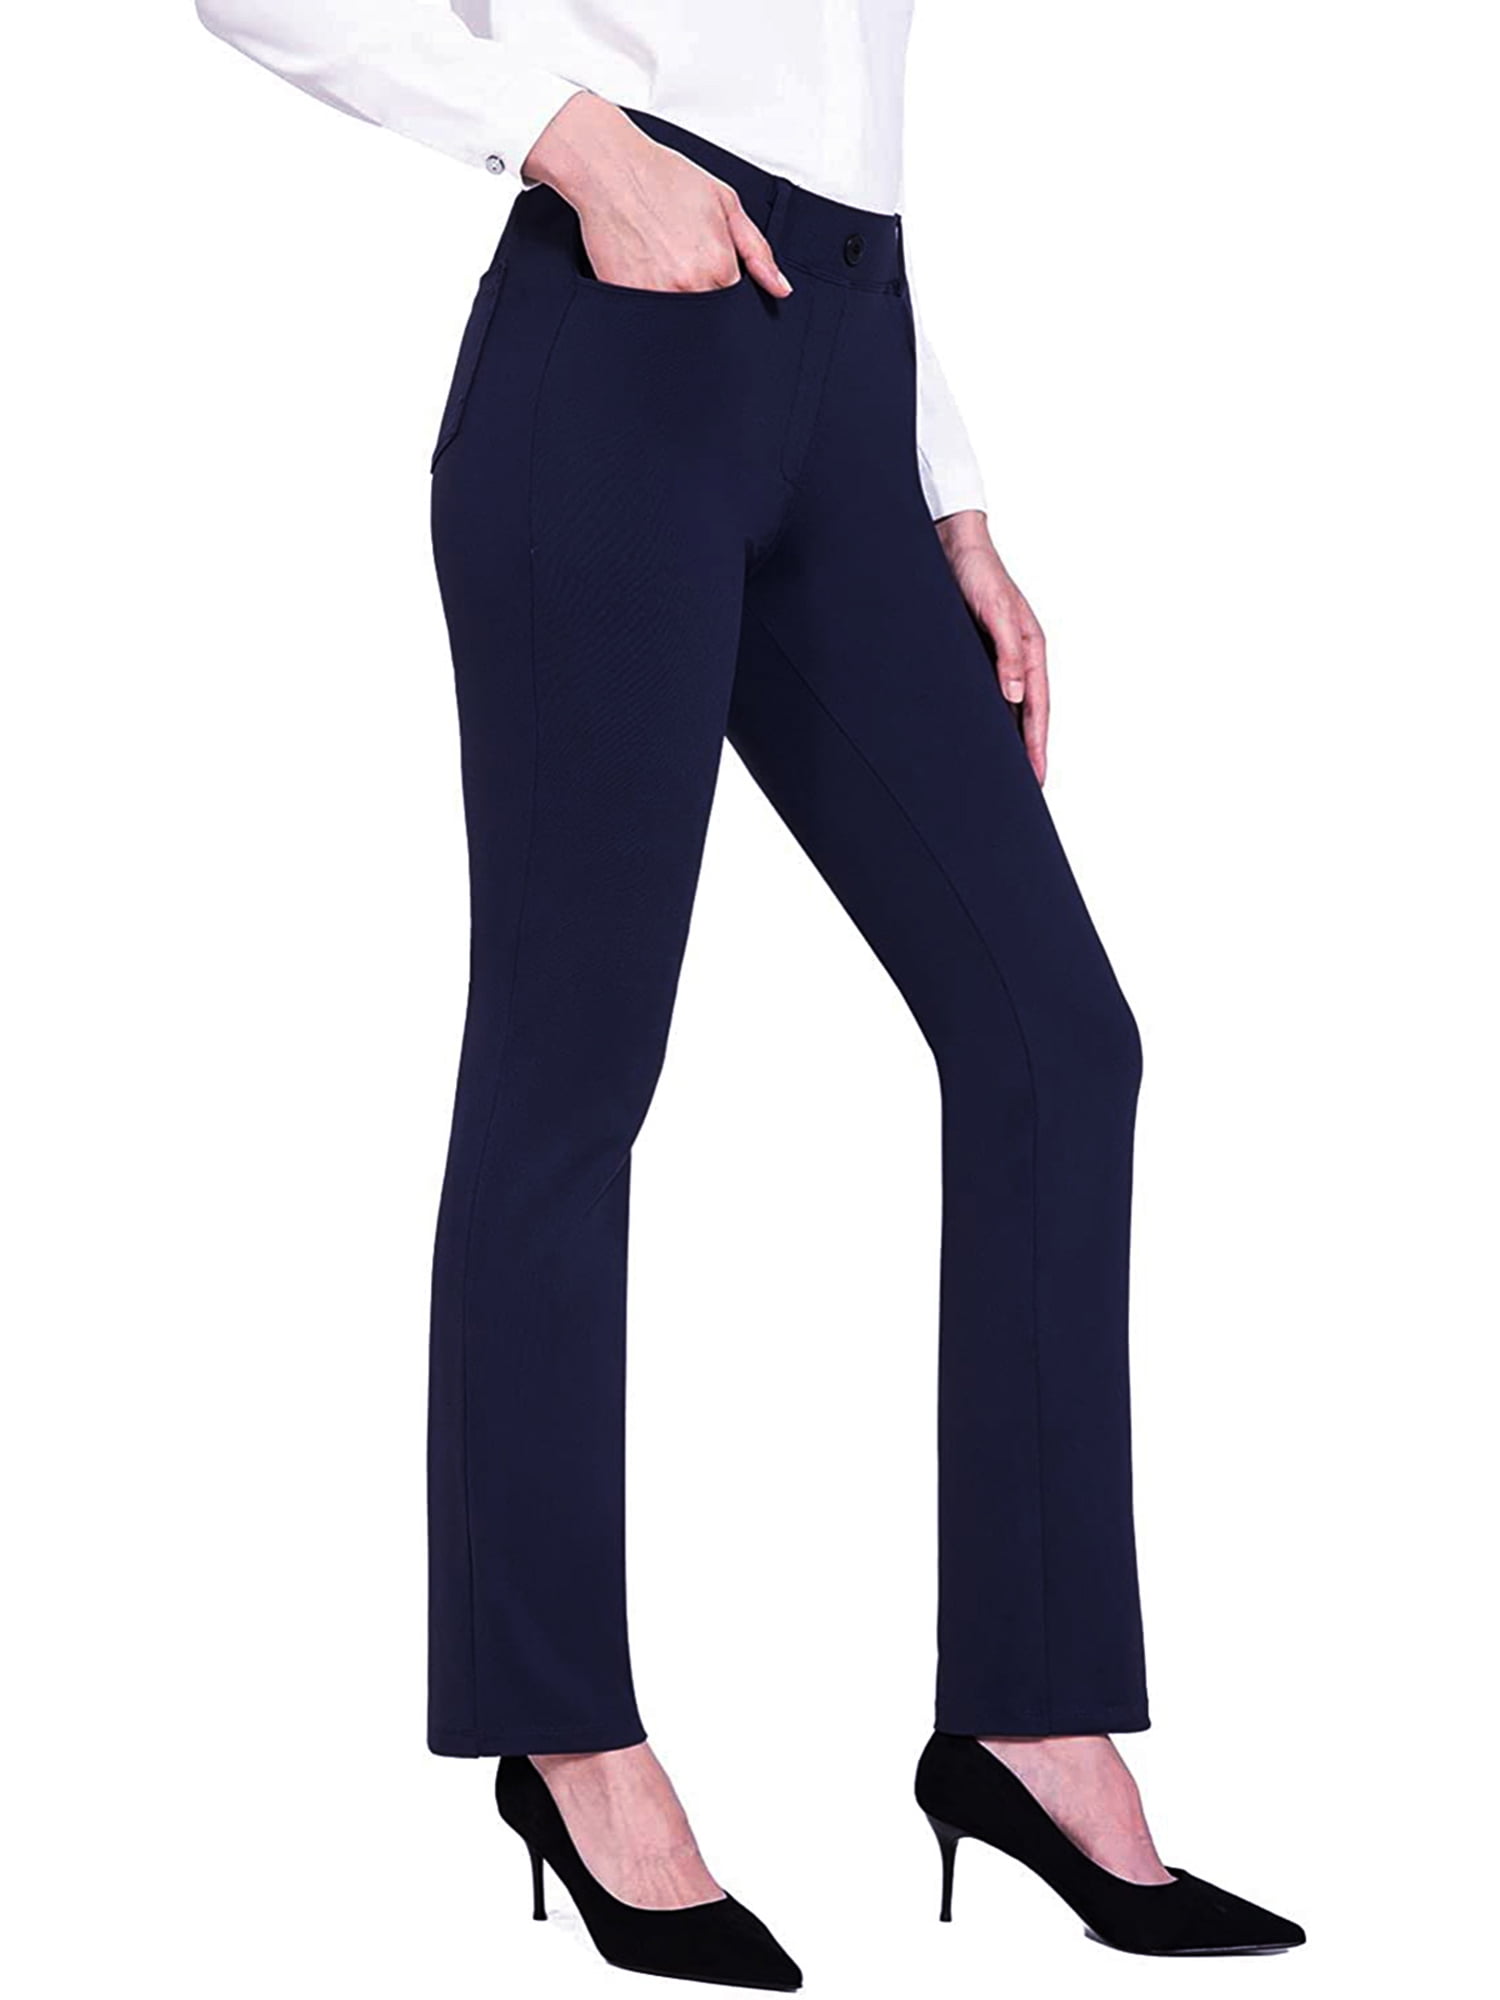 Yoga Pants for Women Stretchy Work Business Slacks Dress Pants Casual  Straight Leg Trousers with Pockets 